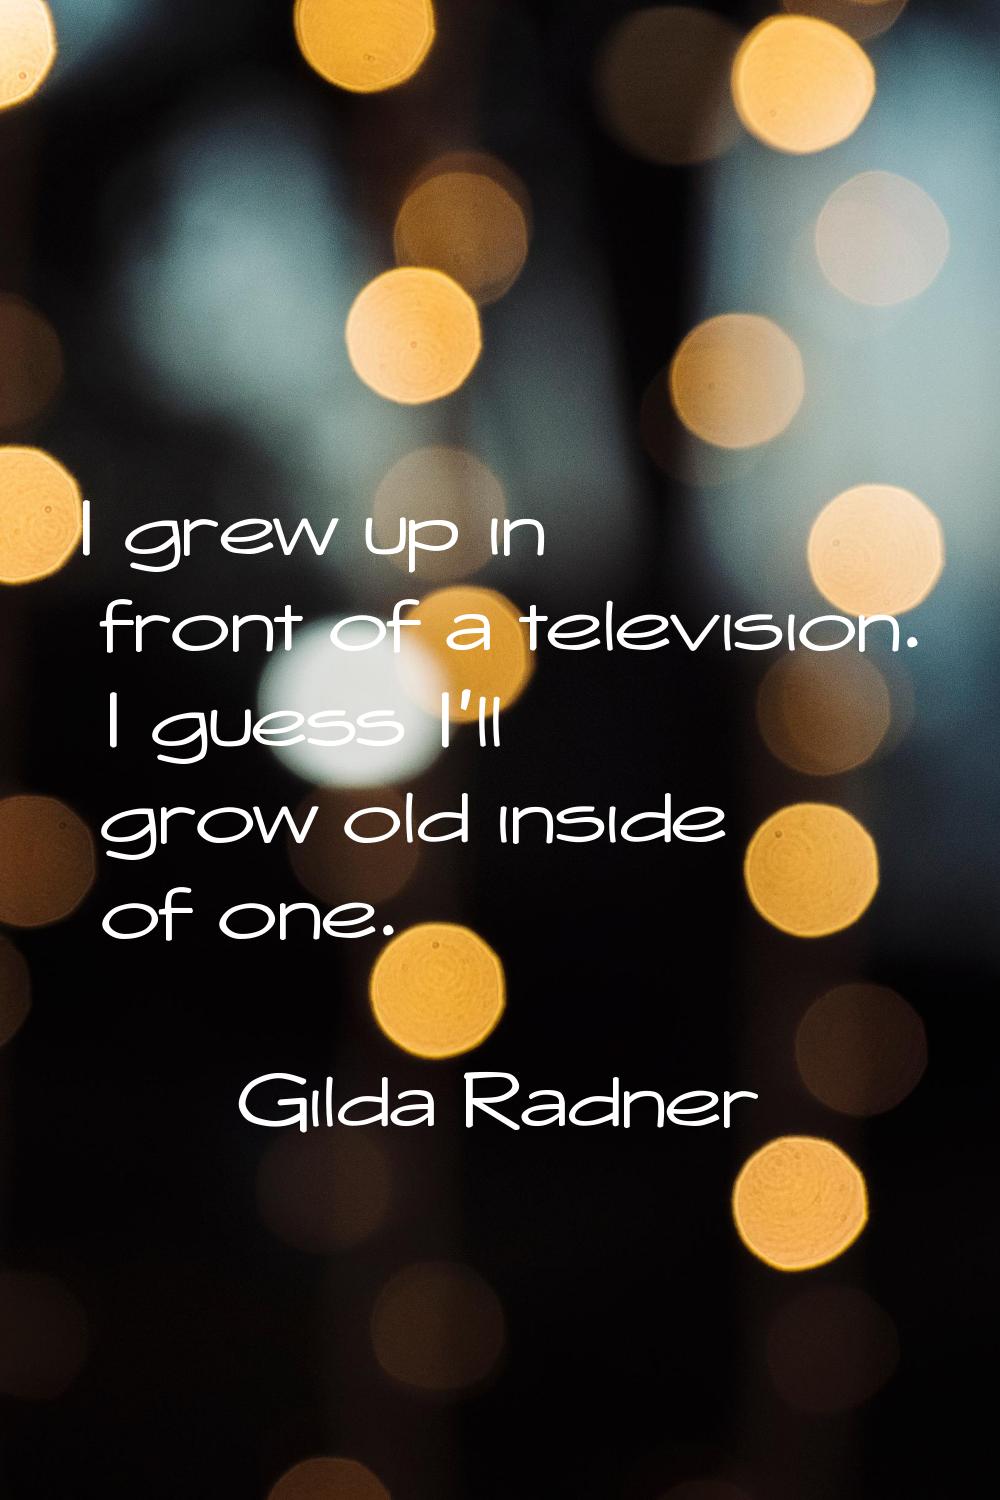 I grew up in front of a television. I guess I'll grow old inside of one.